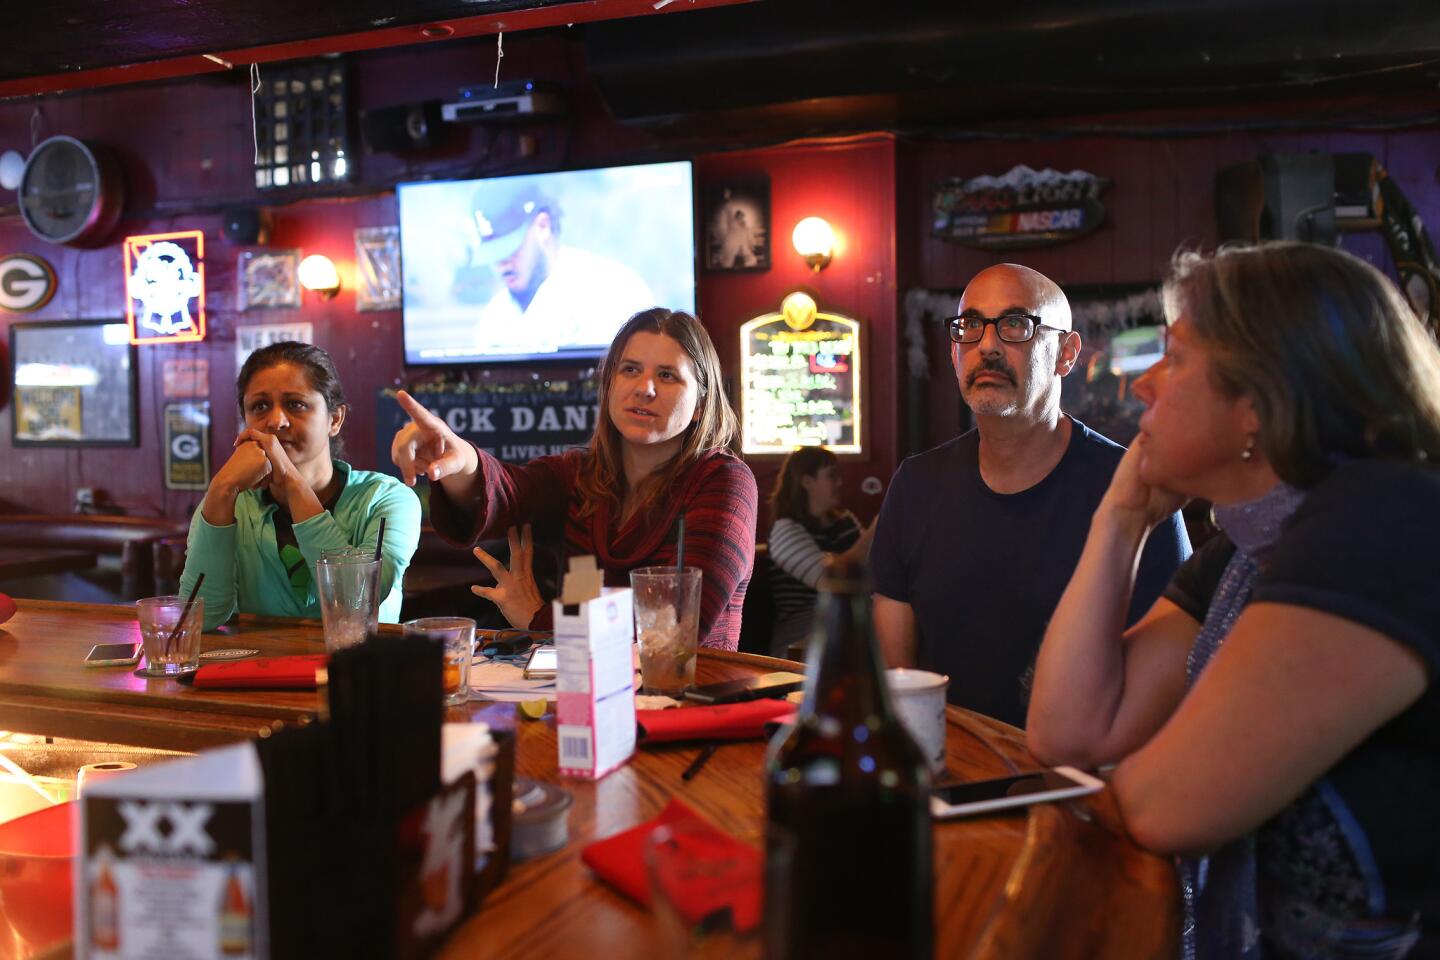 Tahmina Khan, Annette Morasch, Scott Malsin and Maya Grafmuller gather at the bar of the Tattle Tale Room to watch the public testimony of former FBI director James Comey during an investigative hearing being shown live on television.